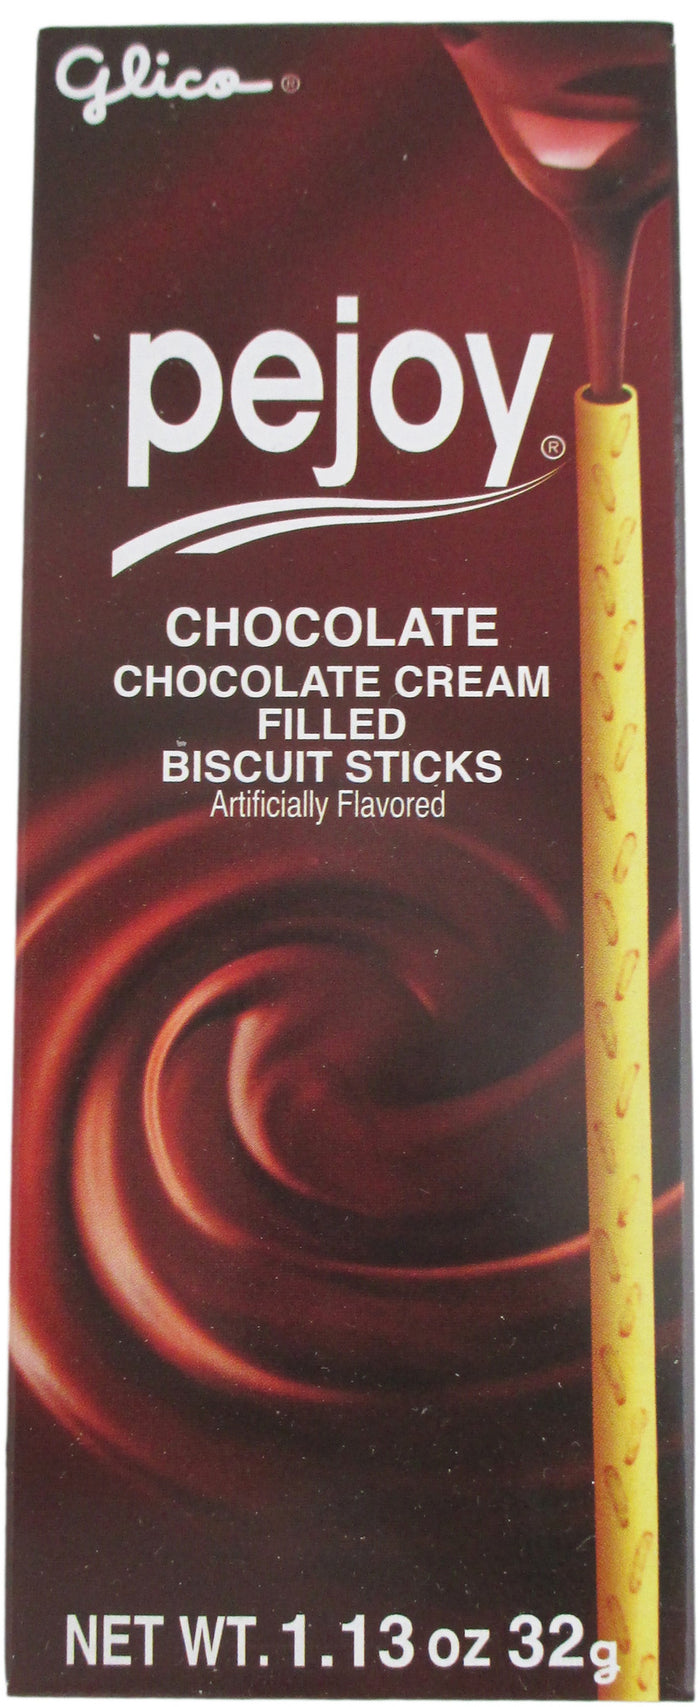 Glico Pejoy - Chocolate Cream Filled Biscuit Sticks - 1.13 oz / 32 g - Asiangrocery2yourdoor